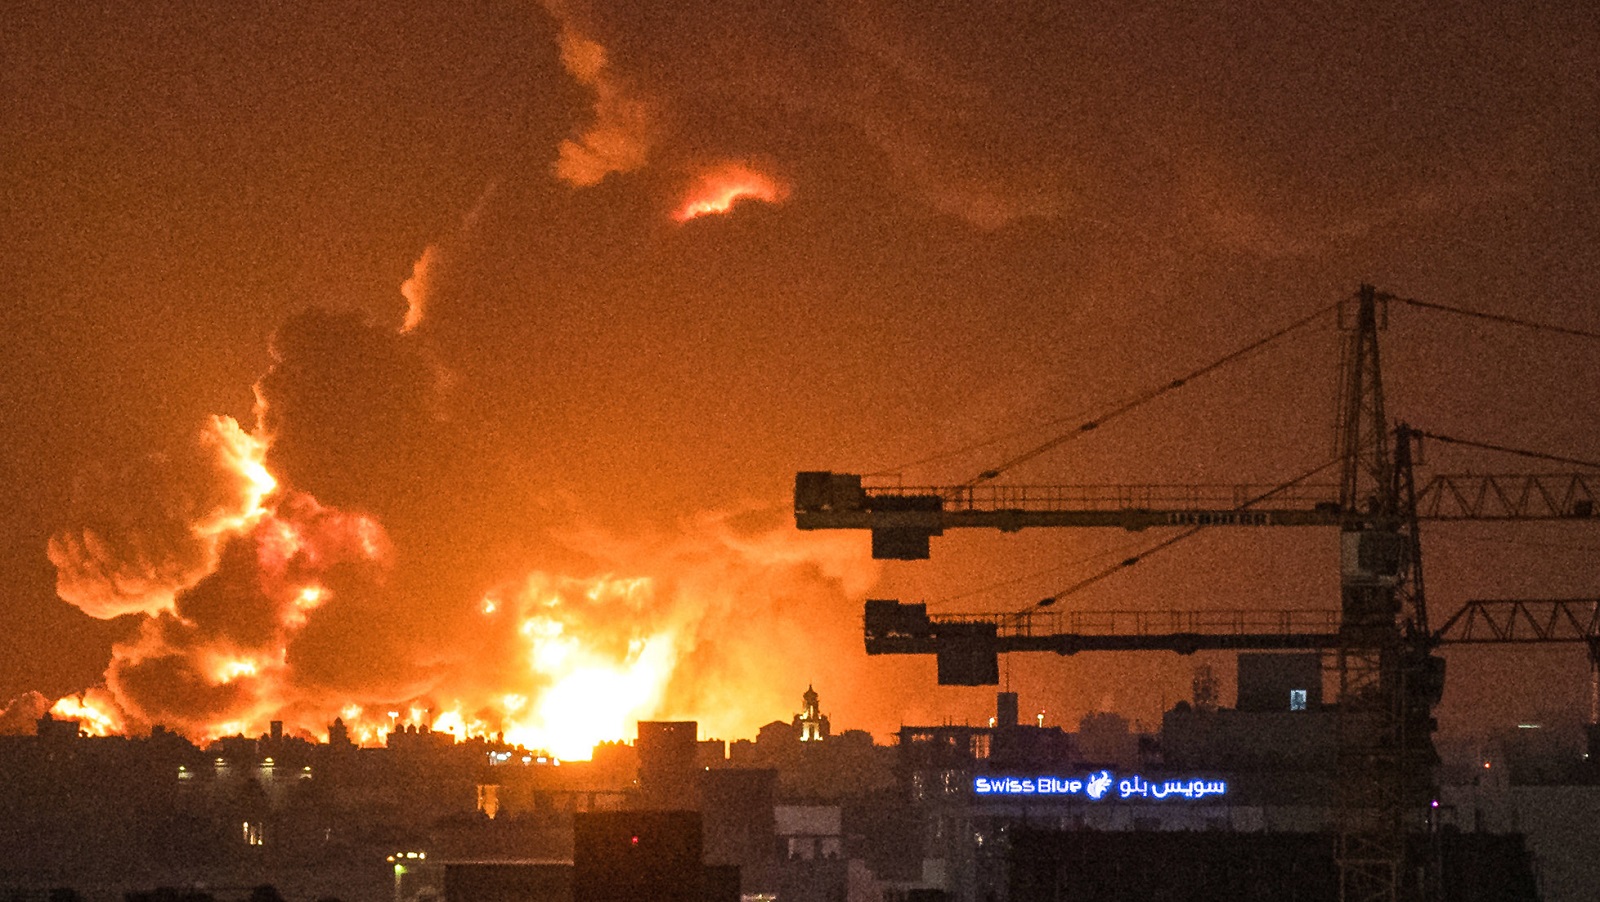 Smoke and flames rise from an oil facility in Saudi Arabia's Red Sea coastal city of Jeddah, on March 25, 2022, following a reported Yemeni rebels attack.